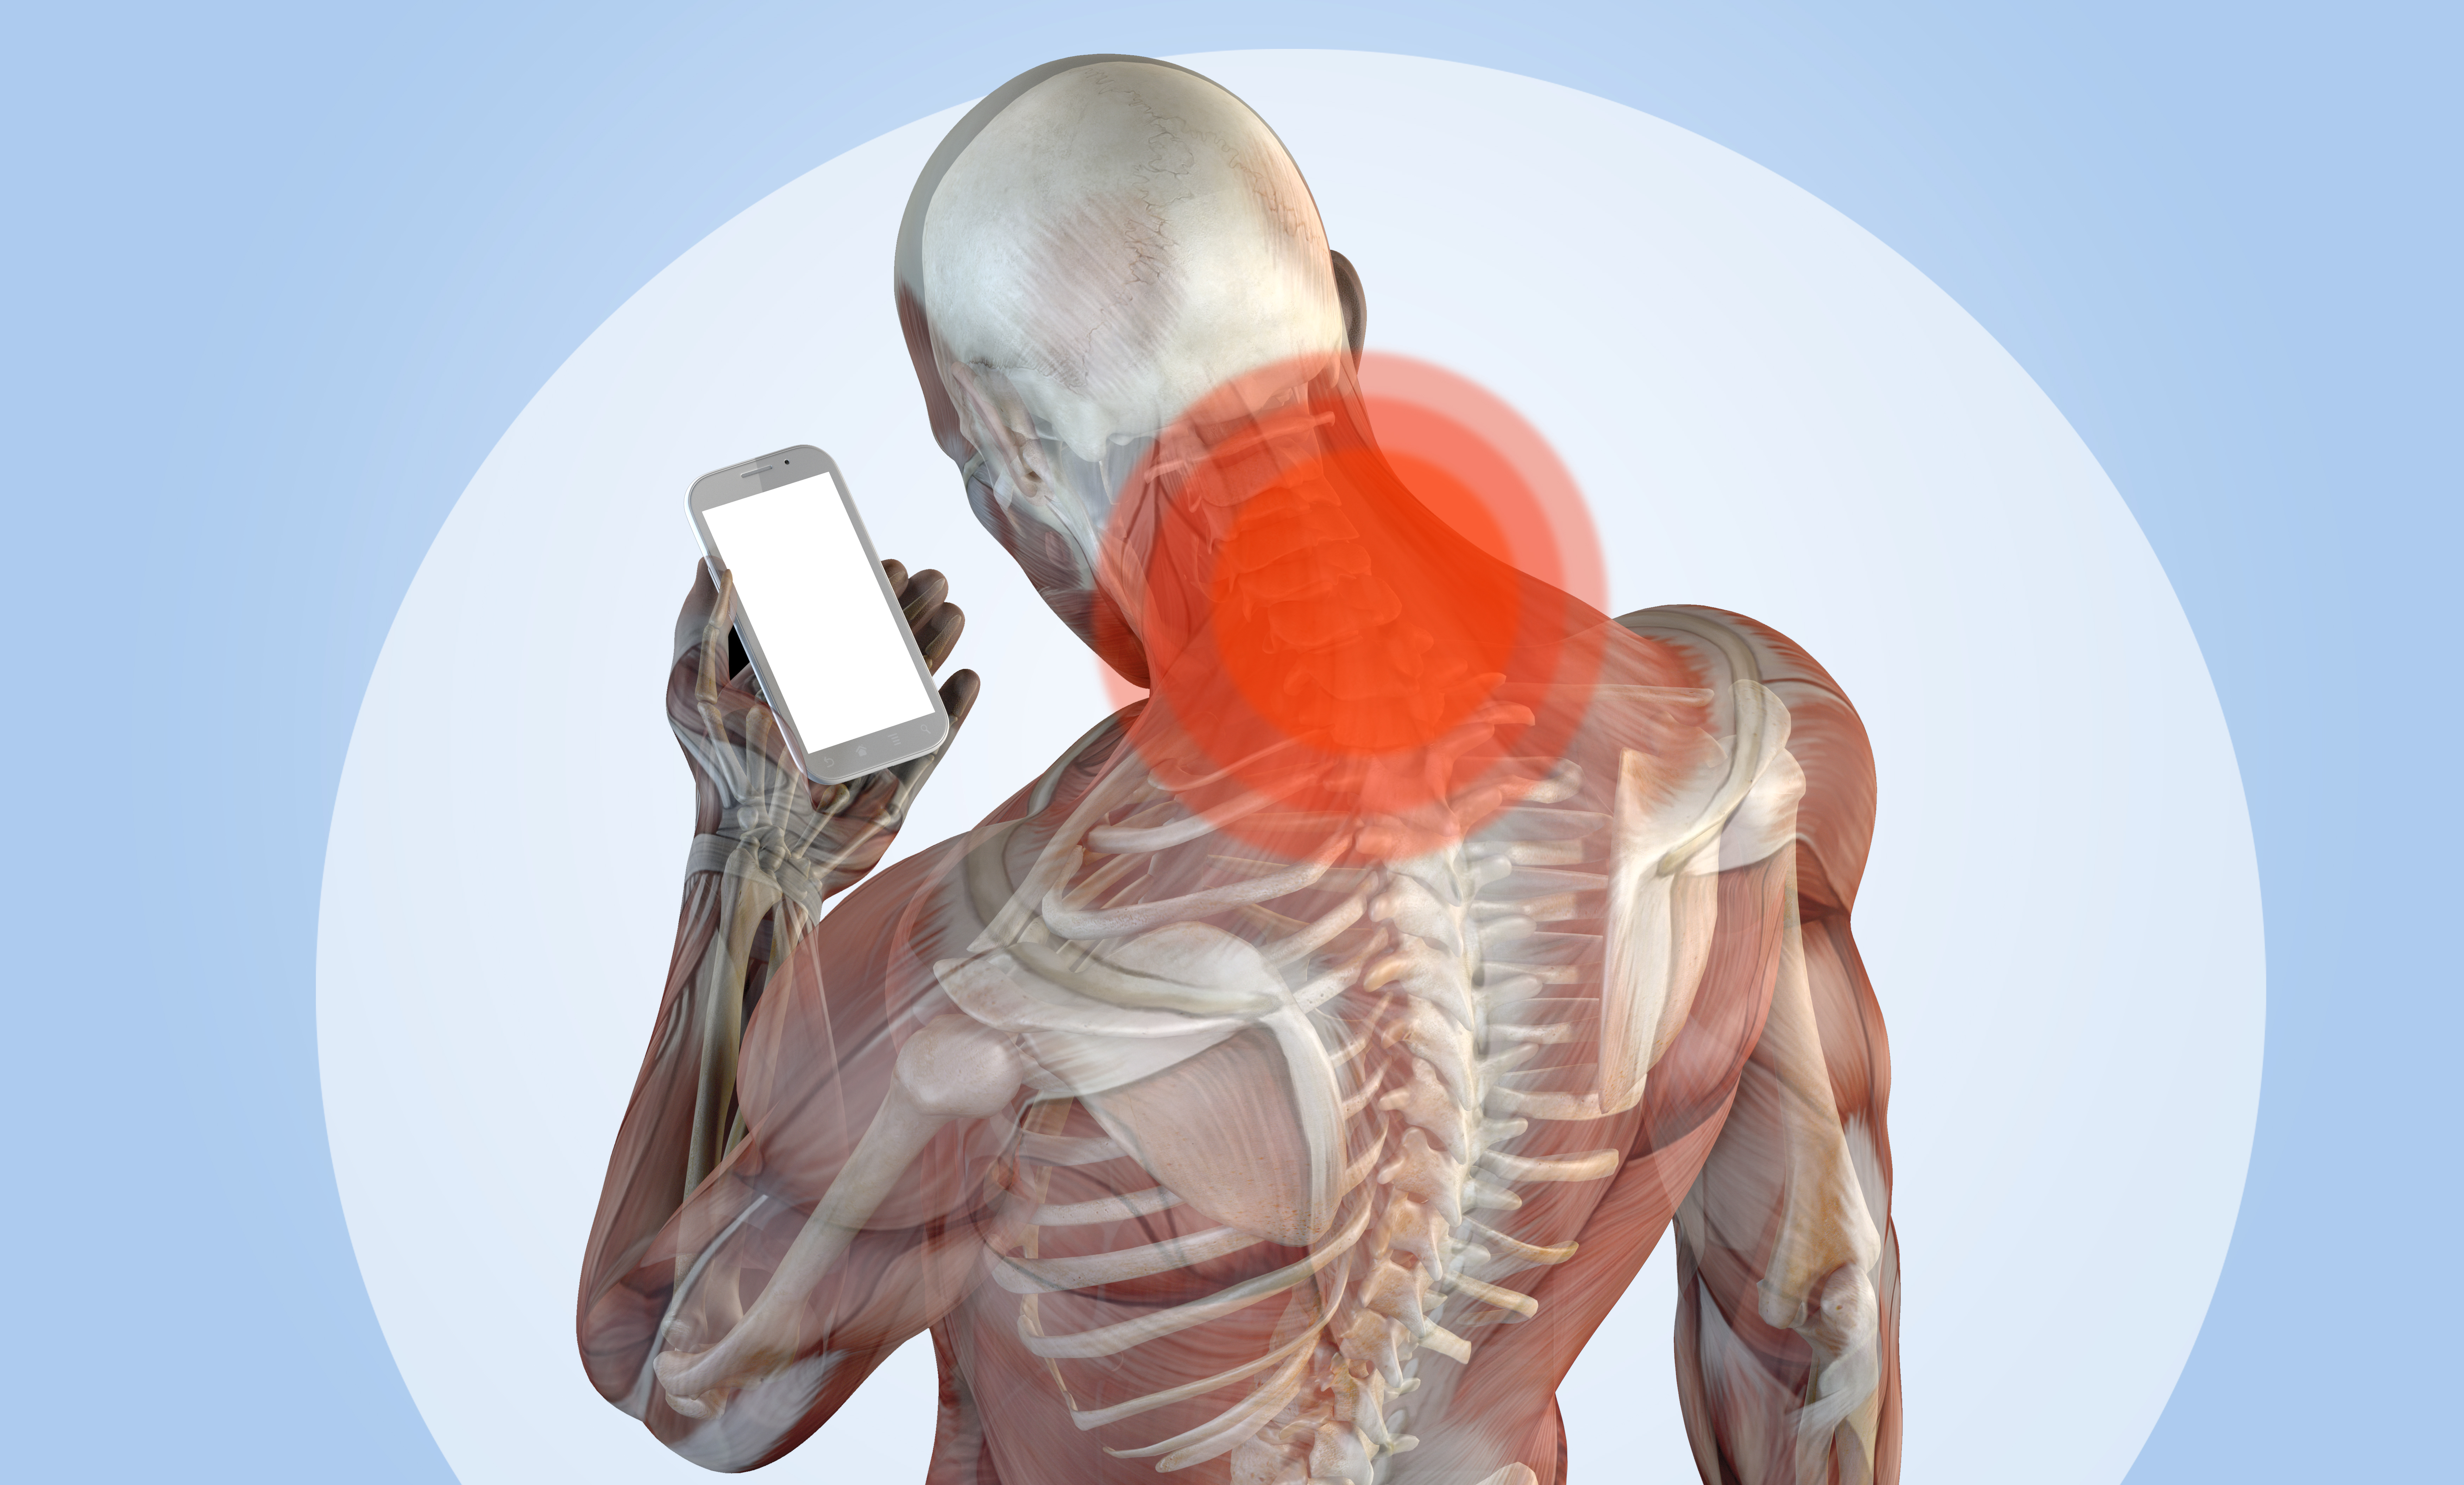 Tech neck: 7 things to do now to improve posture and relieve neck pain